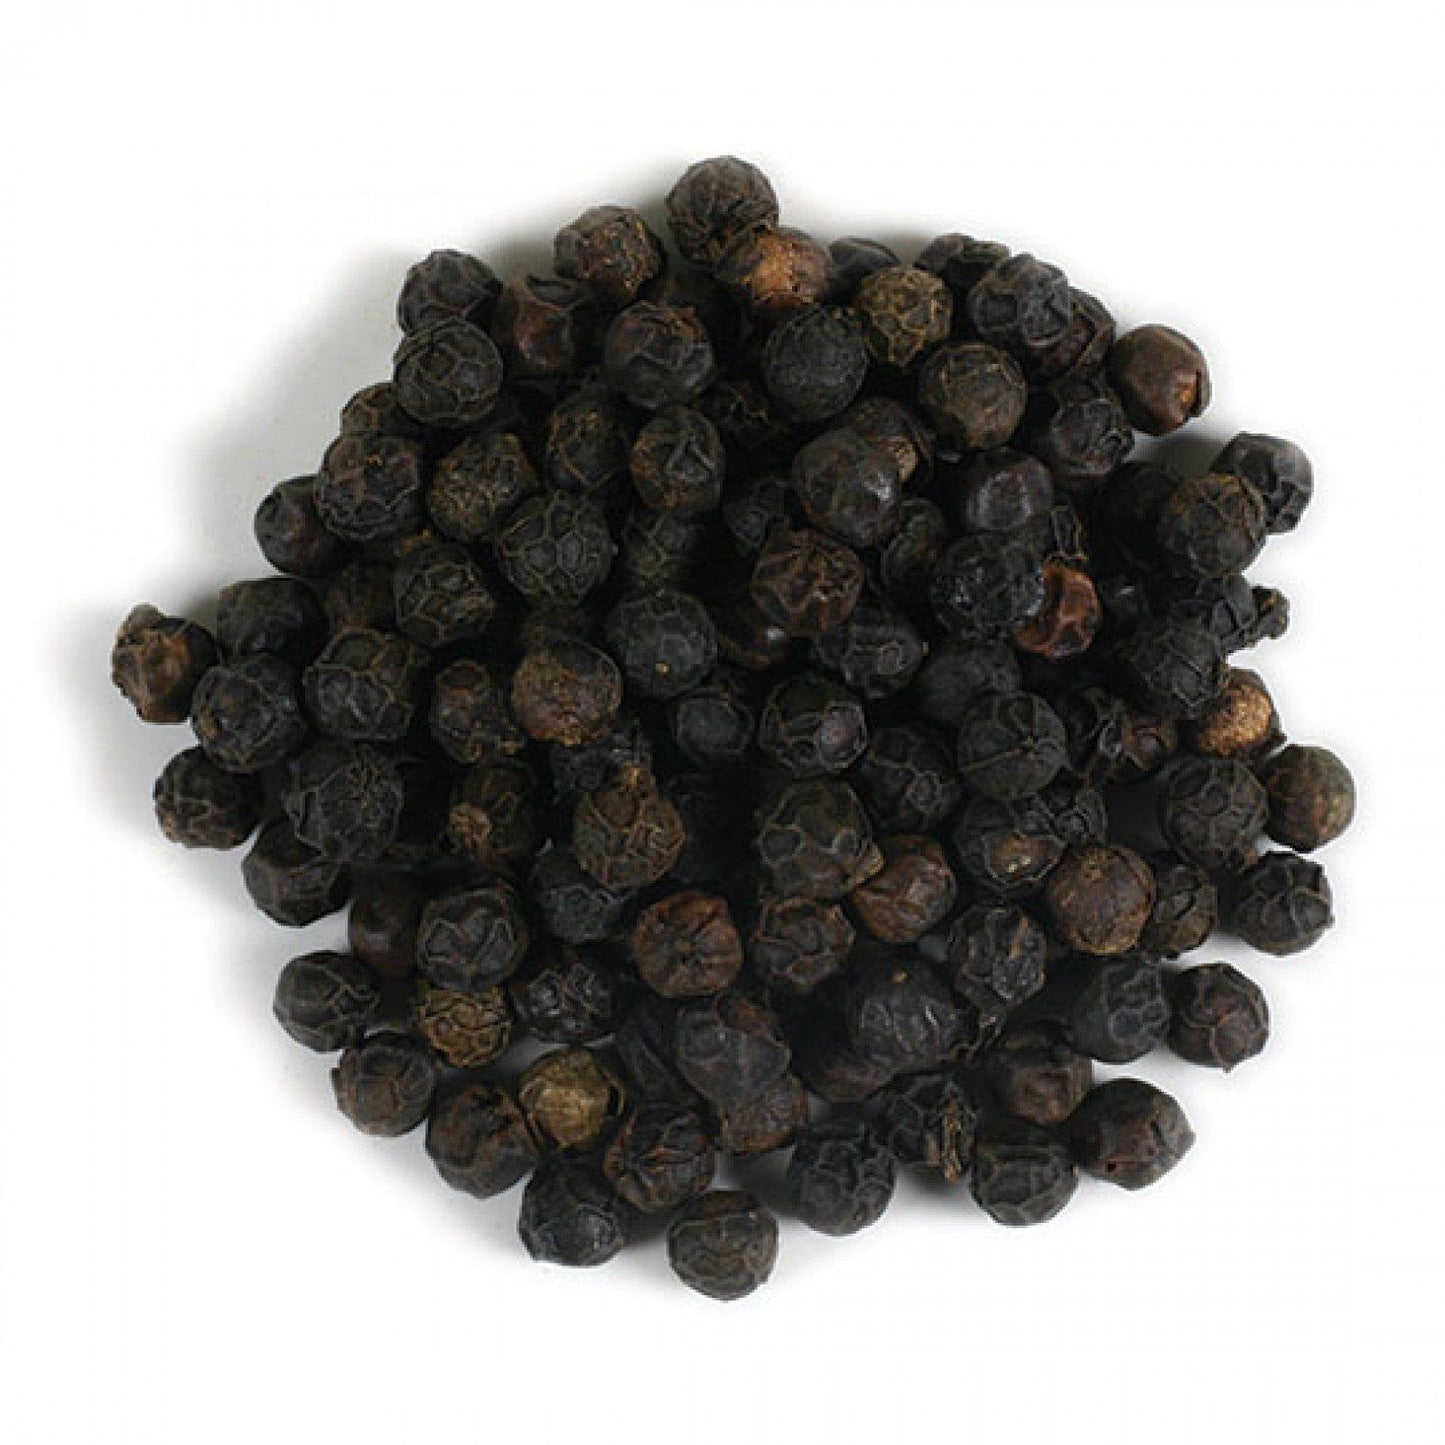 Bunch of peppercorns slightly bigger than usual with fruity taste